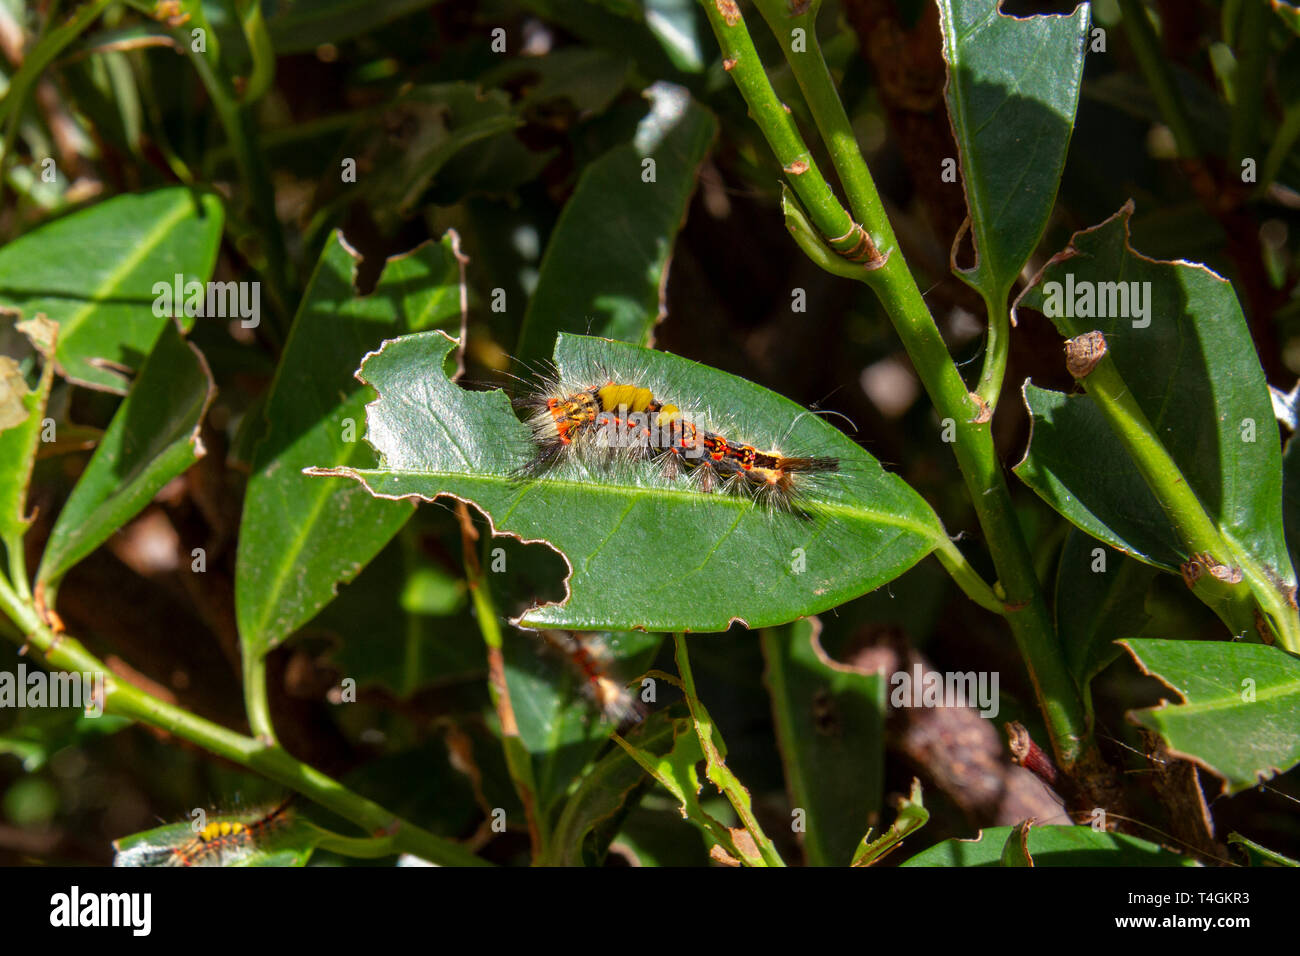 A rusty tussock moth or vapourer caterpillar in a bush in the England, UK. Stock Photo